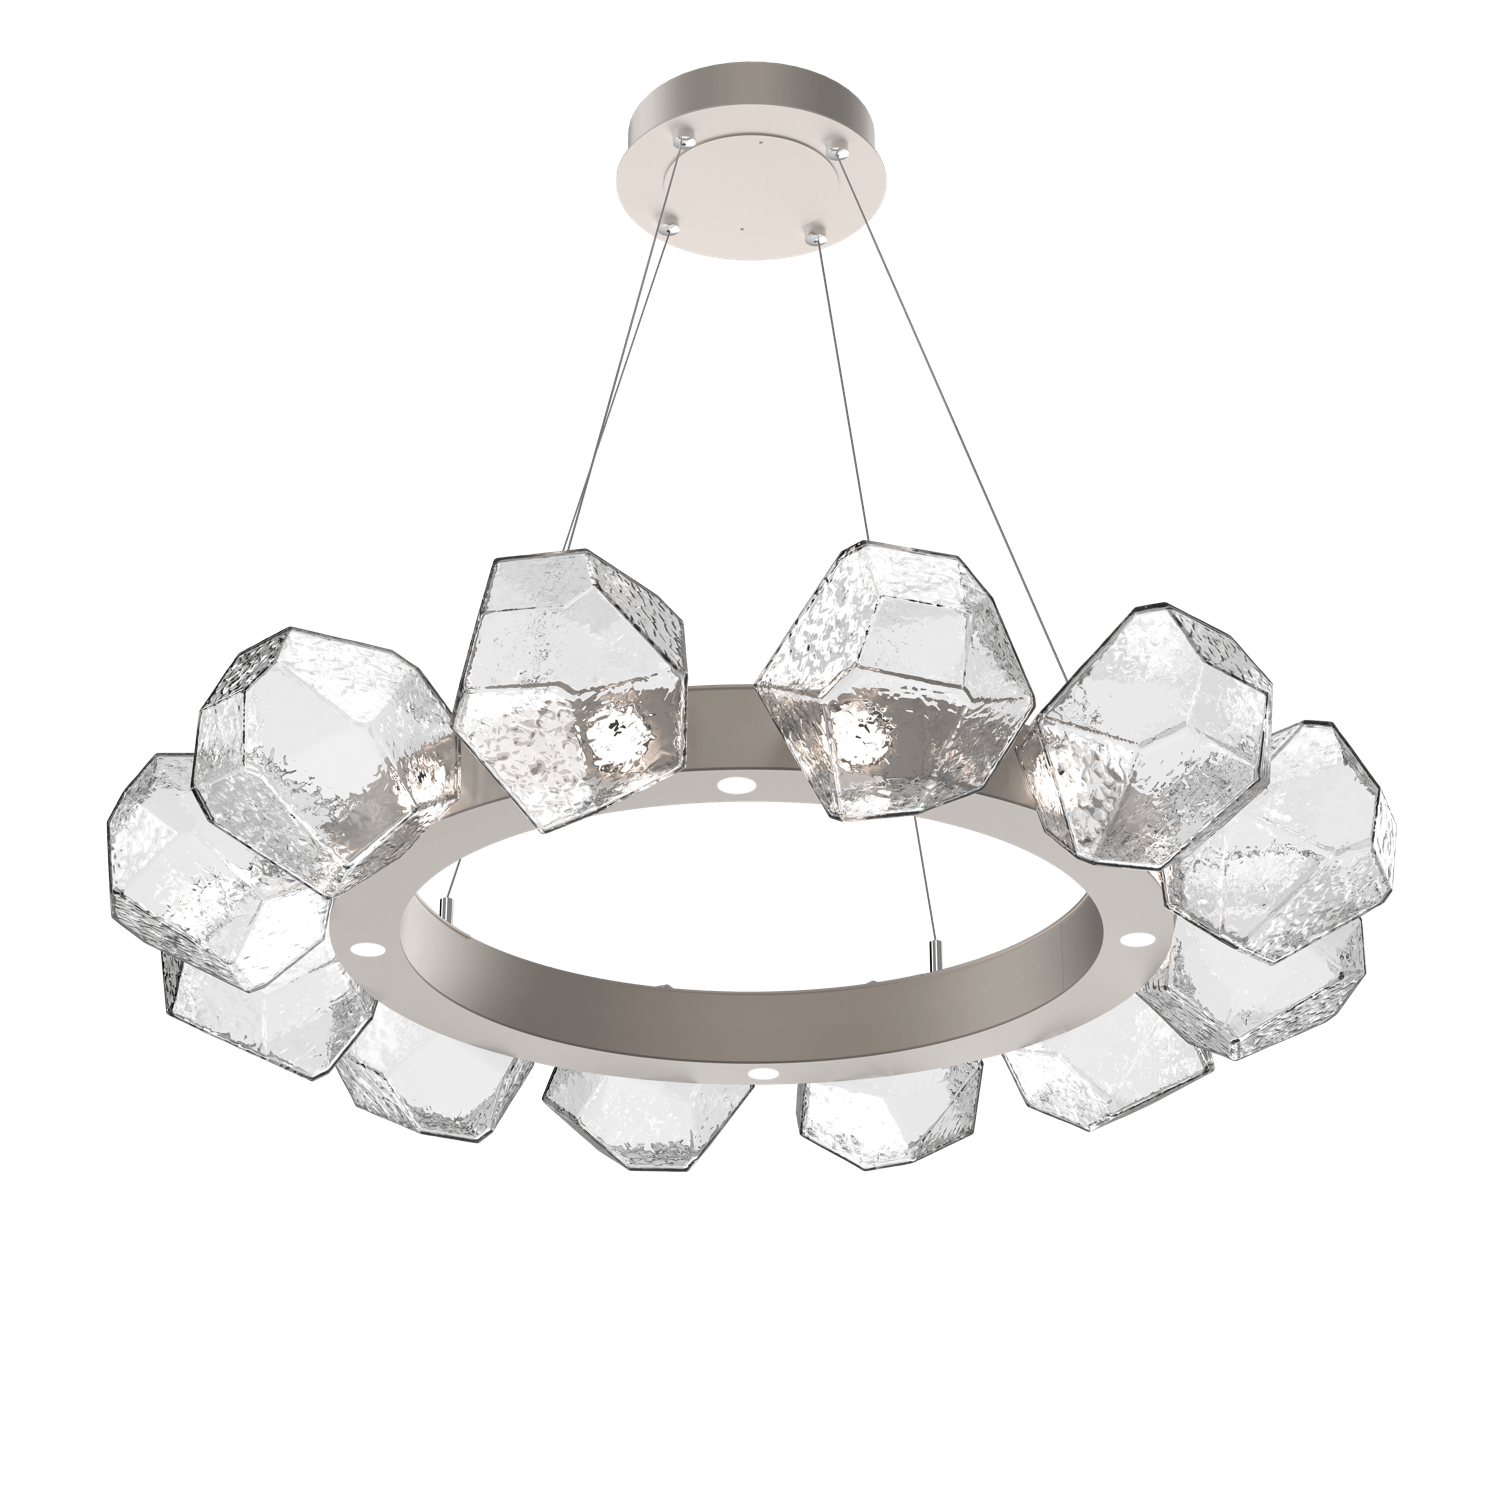 CHB0039-36-BS-C-Hammerton-Studio-Gem-36-inch-radial-ring-chandelier-with-metallic-beige-silver-finish-and-clear-blown-glass-shades-and-LED-lamping